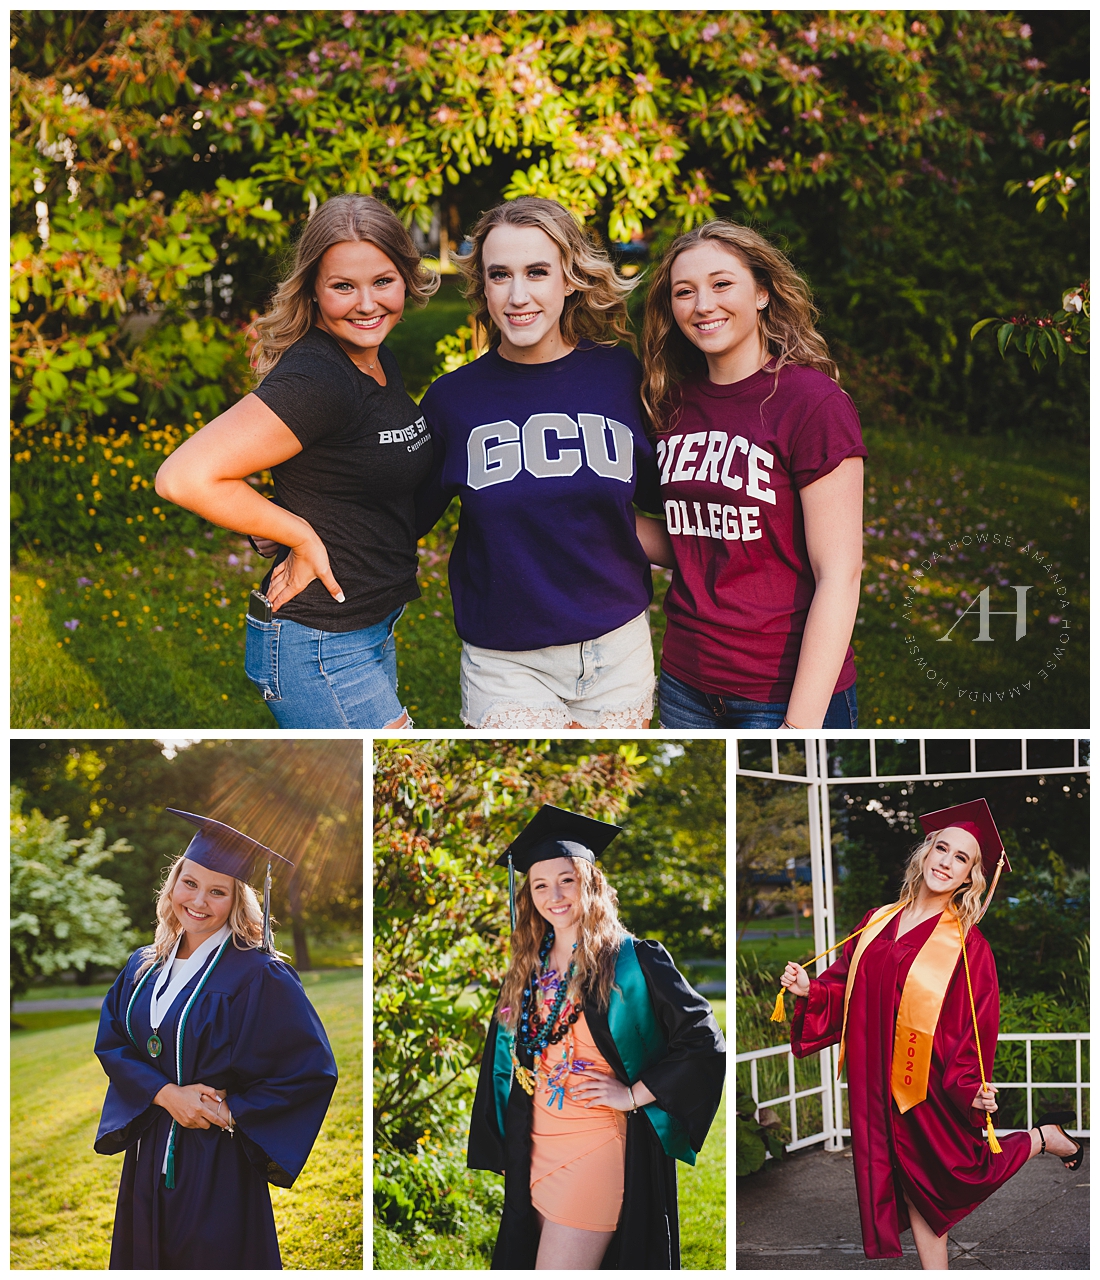 Class of 2020 High School Graduates Wearing College Shirts for Senior Portraits | Photographed by Tacoma Senior Photographer Amanda Howse